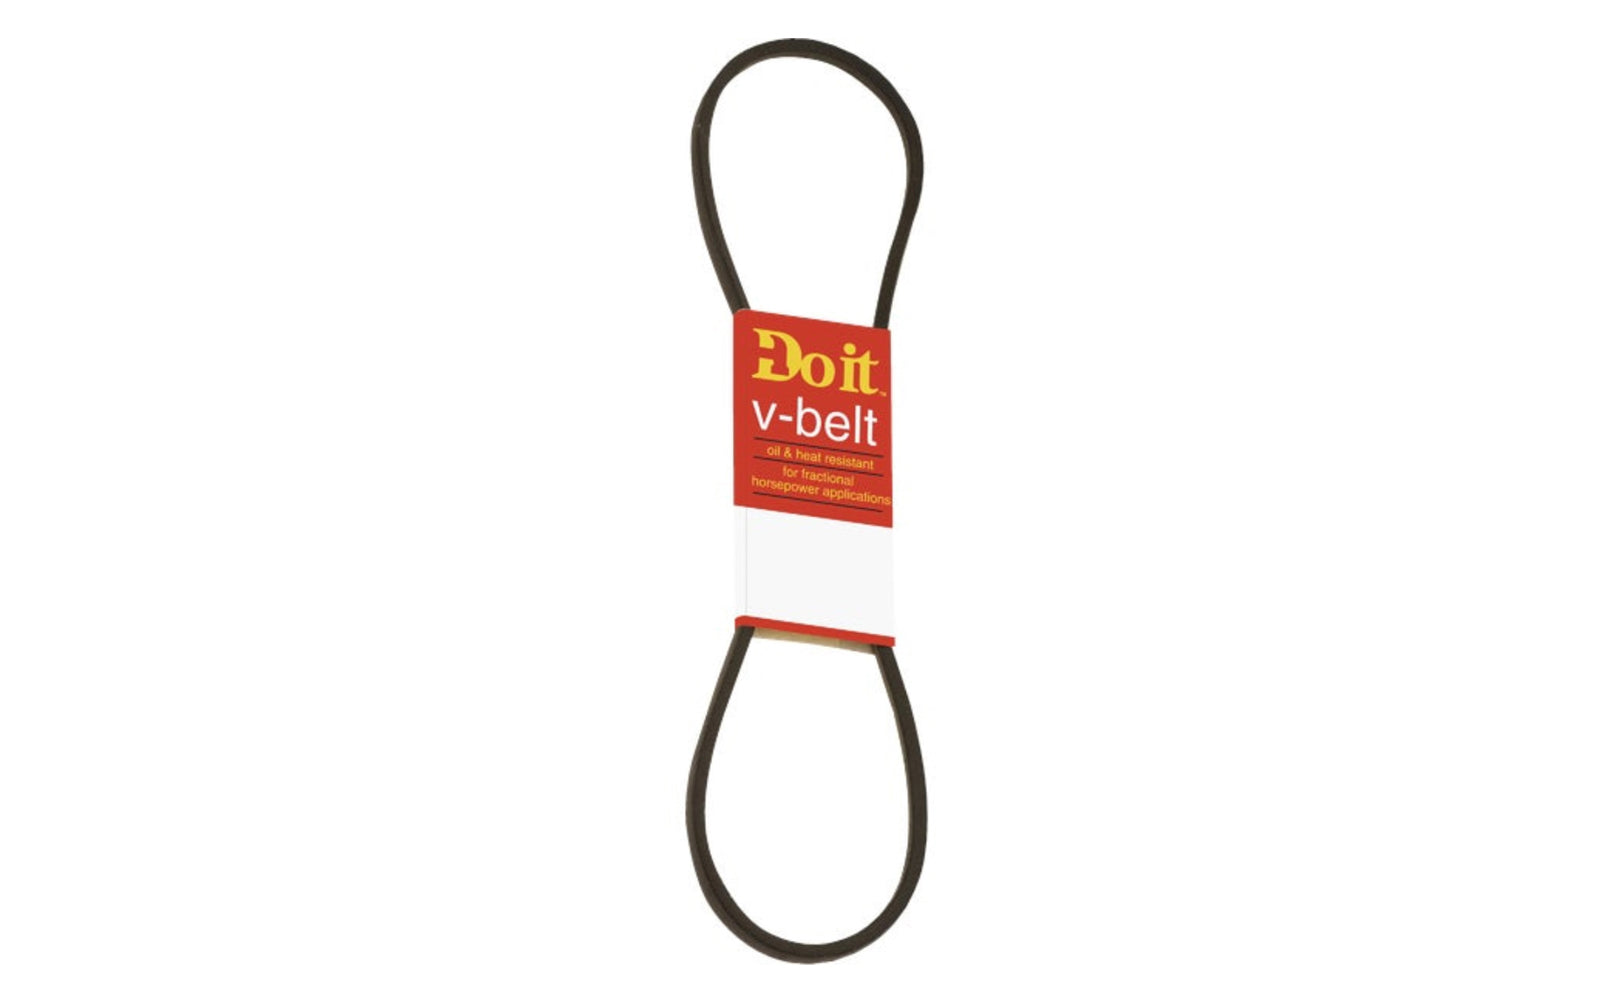 17" Long x 1/2" Width V-Belt - 4L170. Oil & heat resistant. Recommended for 1-3 HP (horsepower) light-duty applications. Typically the best option for electric powered applications. For refrigerators, washing machines, pumps, stokers, woodworking machines. Pulley type: A-Pulley.